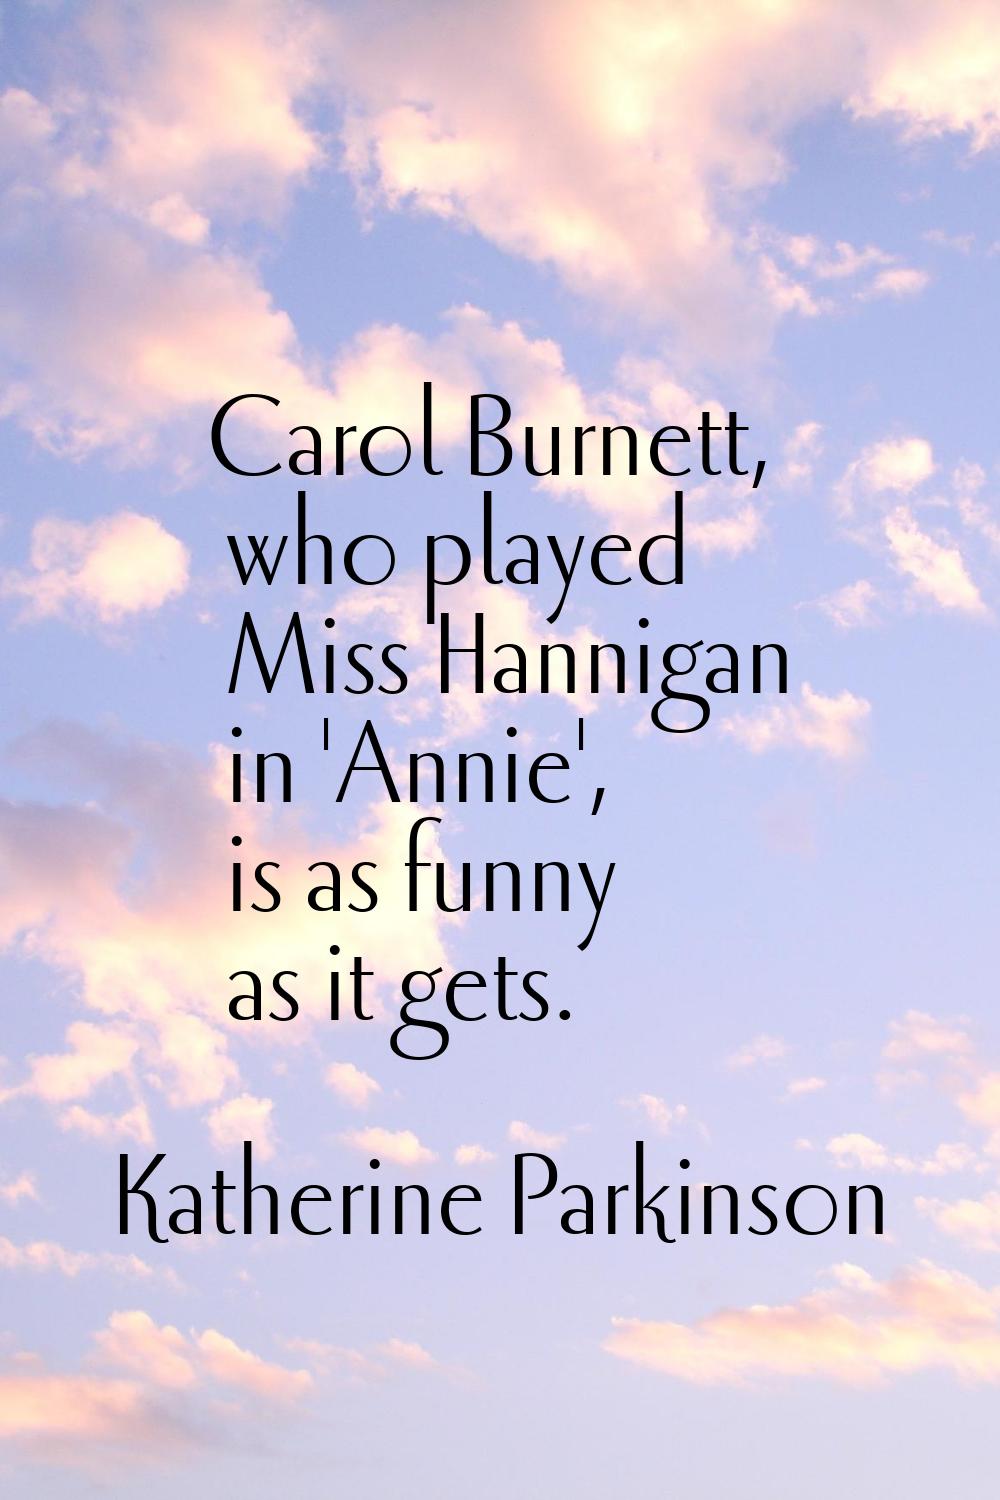 Carol Burnett, who played Miss Hannigan in 'Annie', is as funny as it gets.